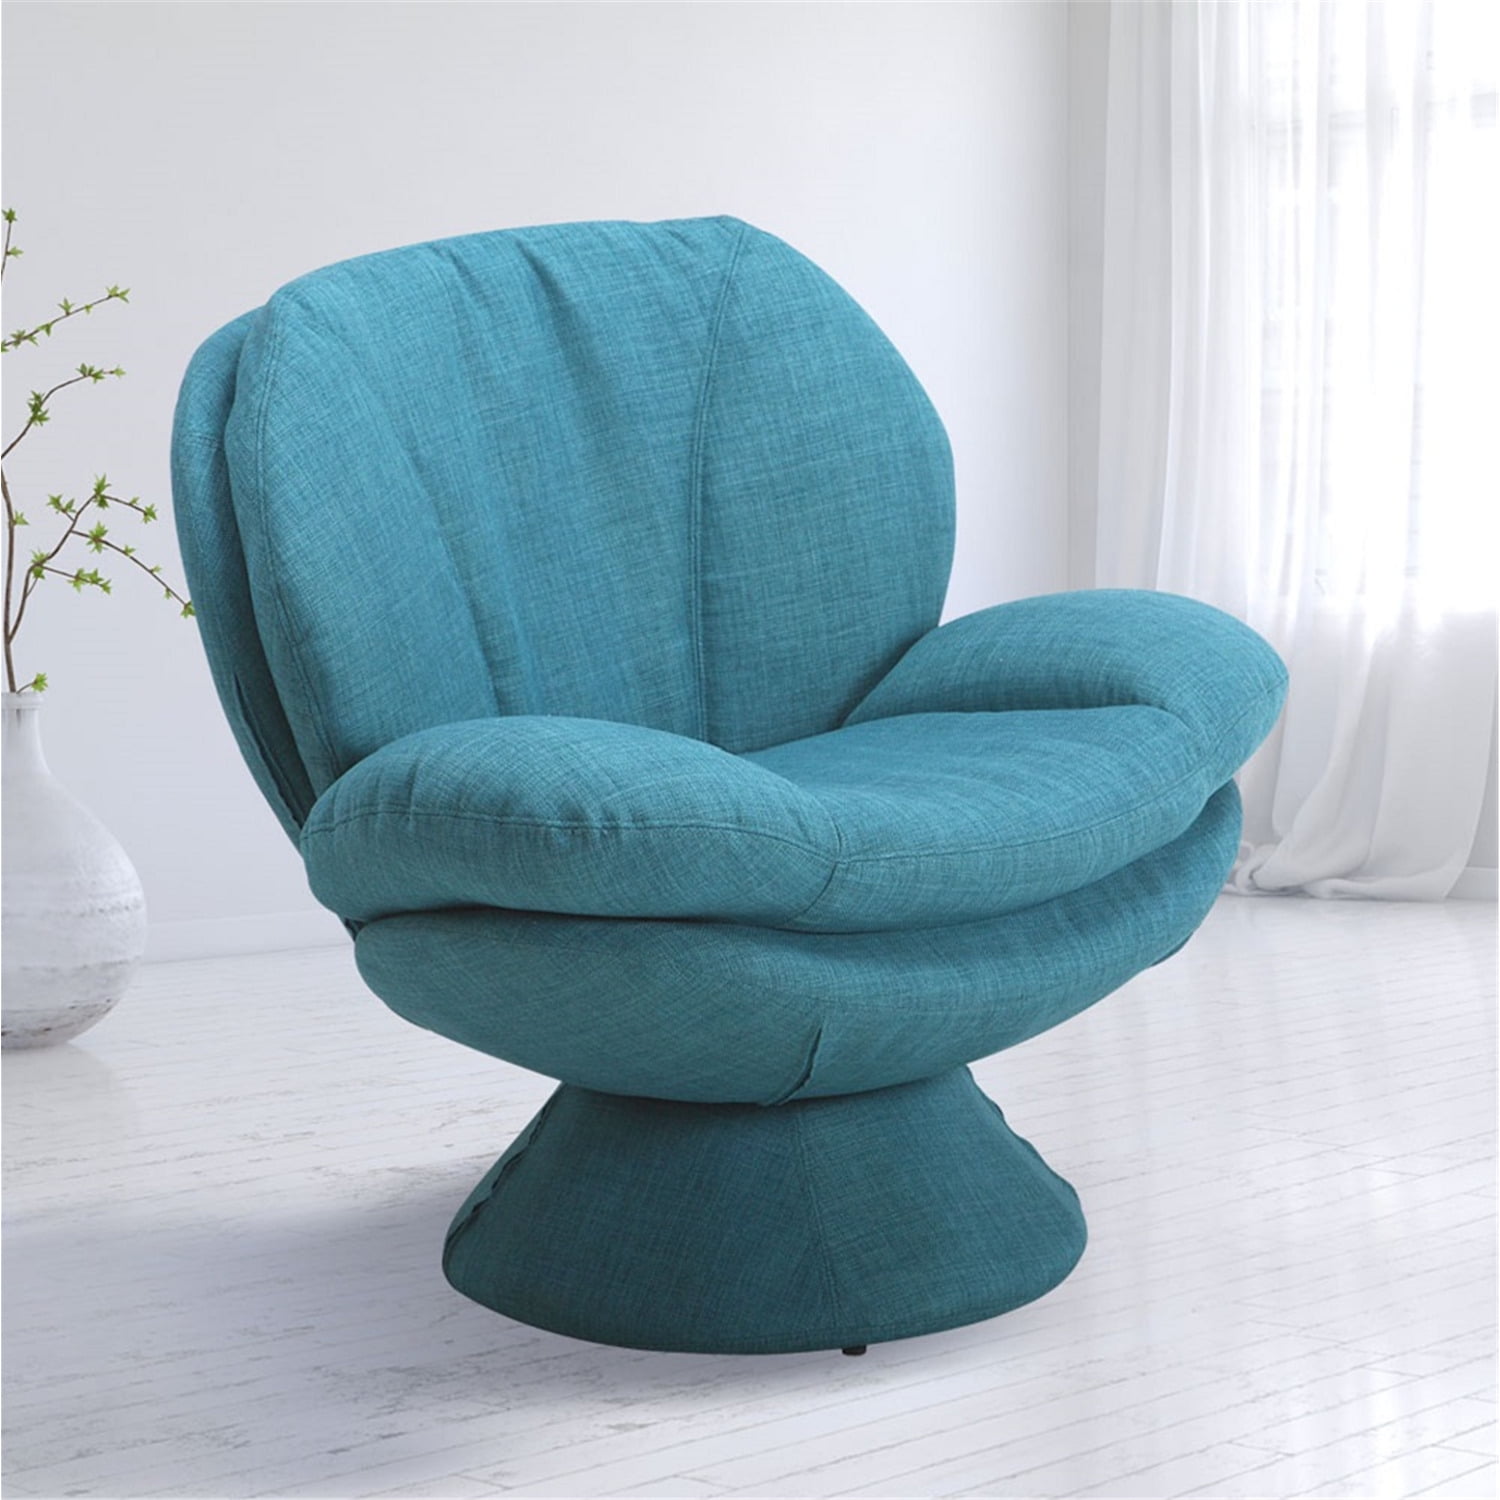 RelaxR Port Leisure Accent Chair in Turquoise Fabric